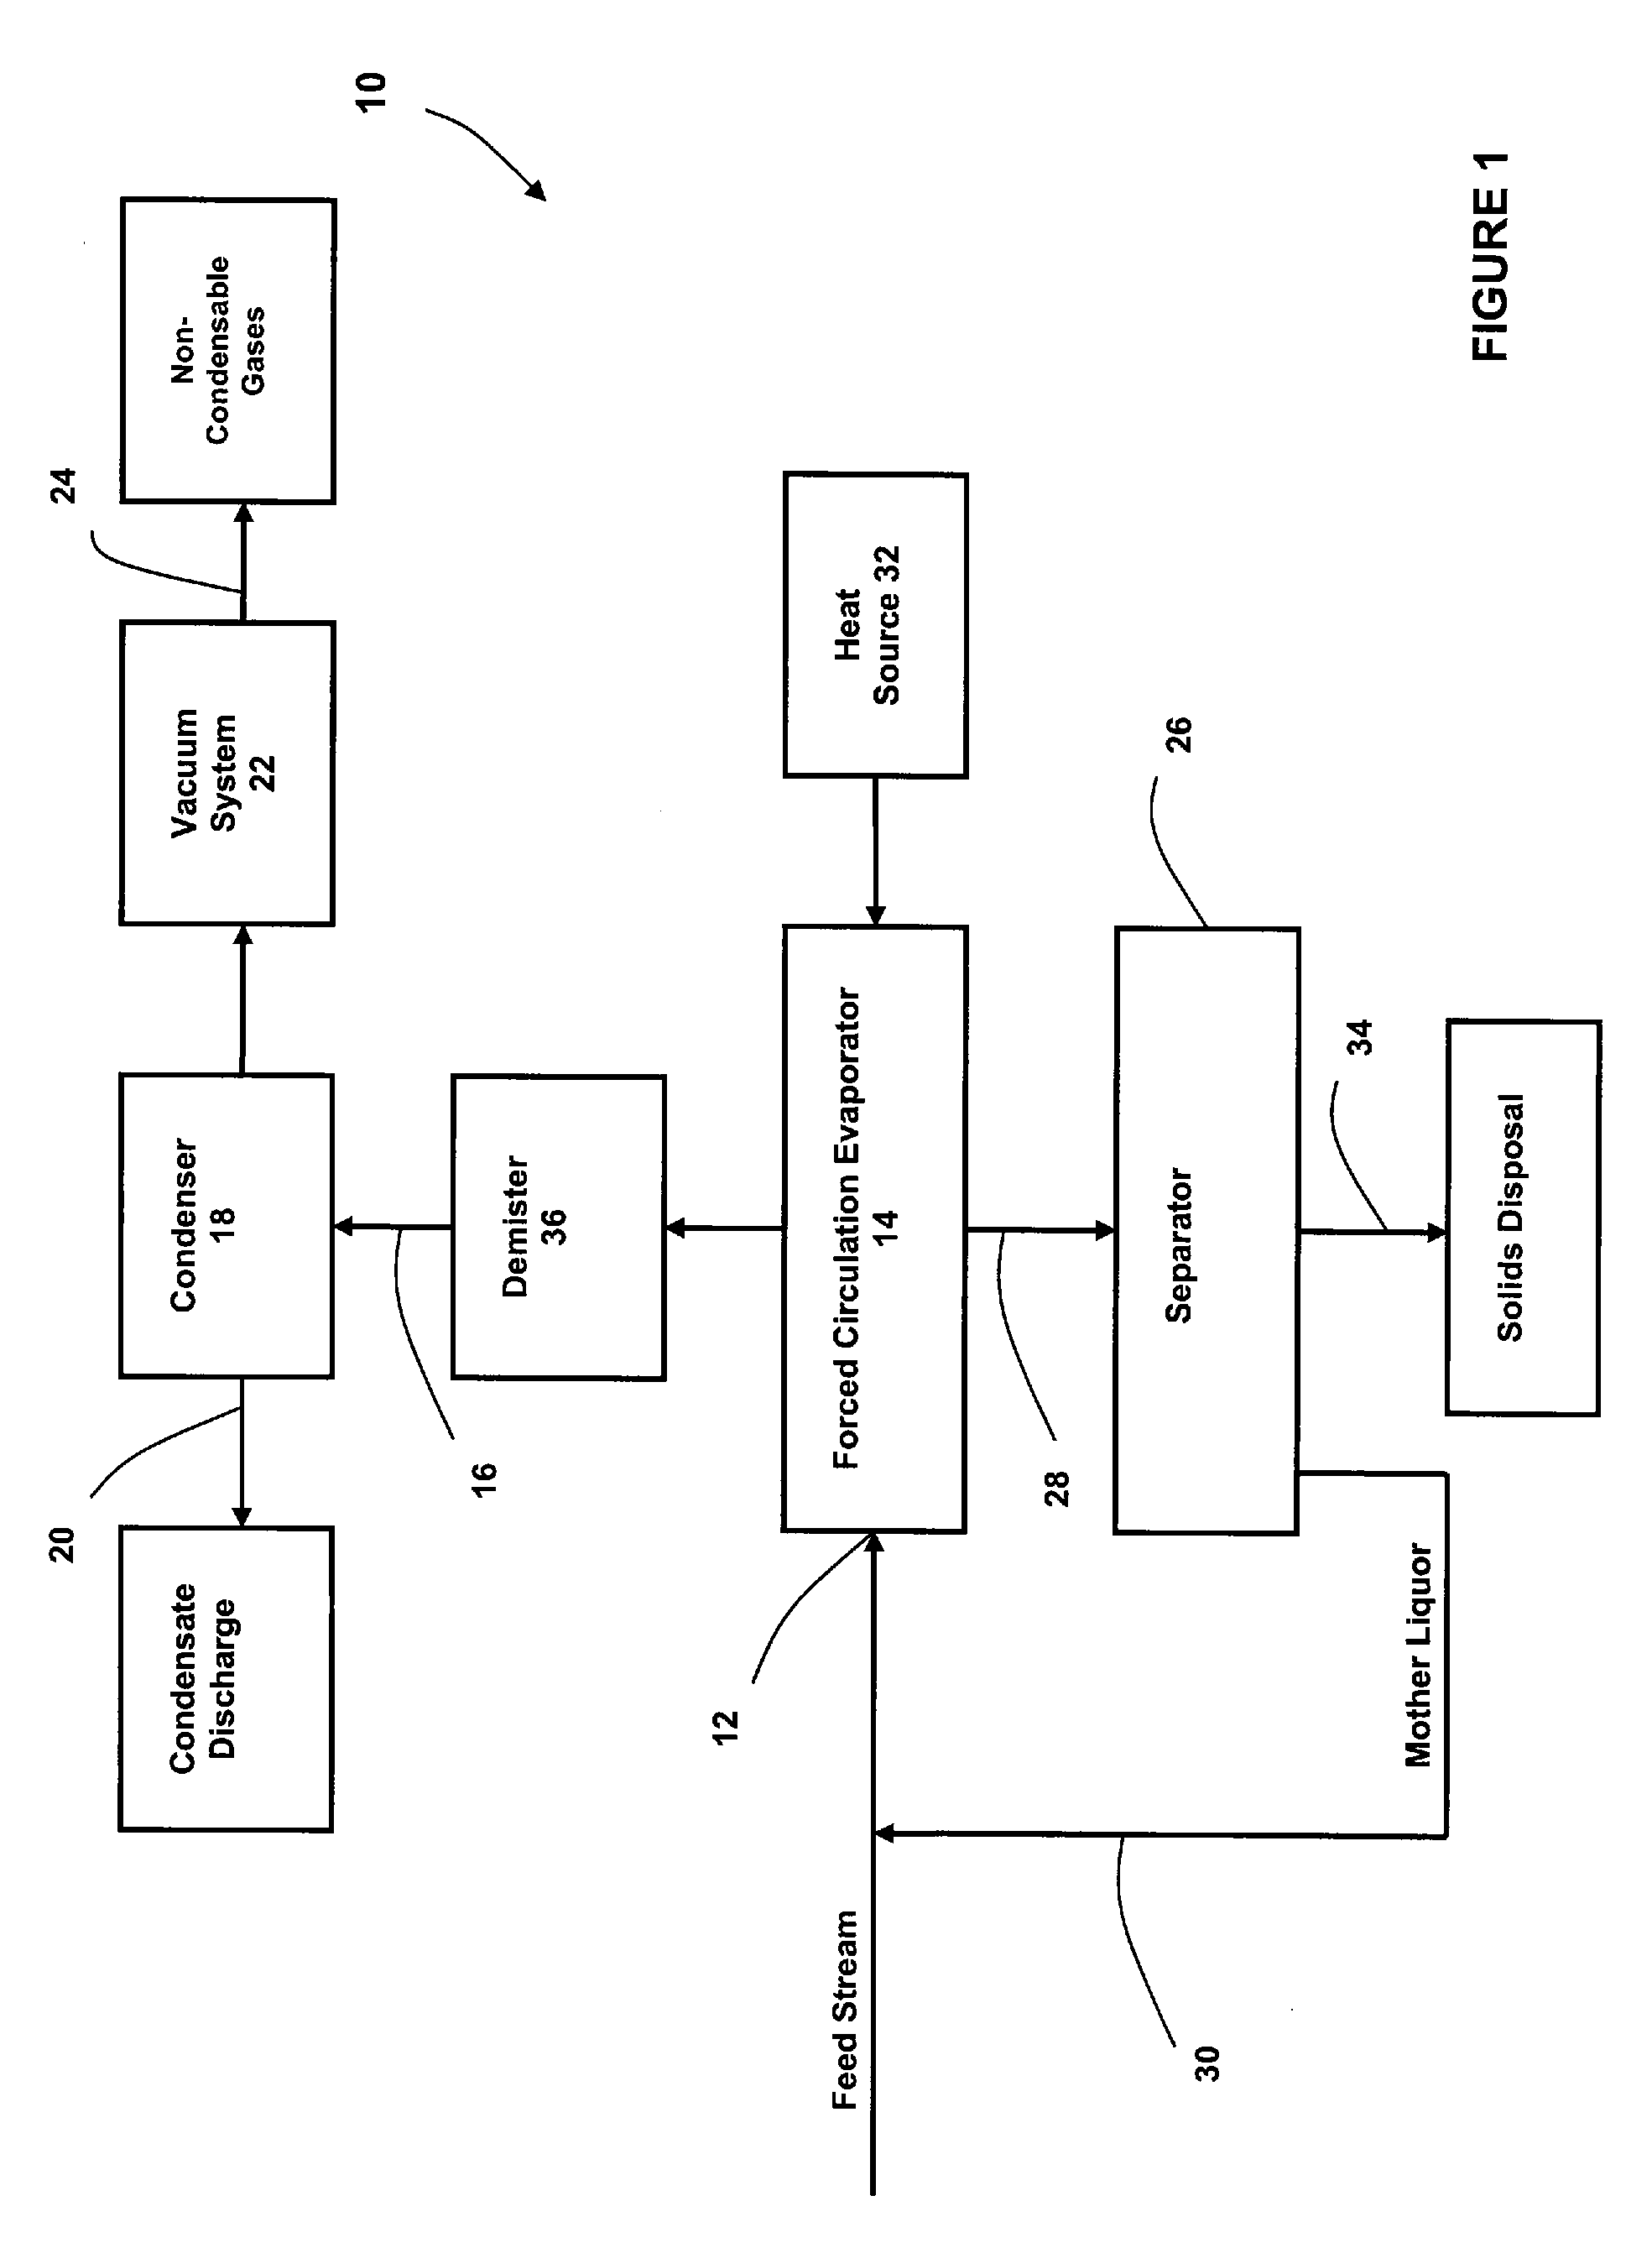 Method for removing dissolved solids from aqueous waste streams